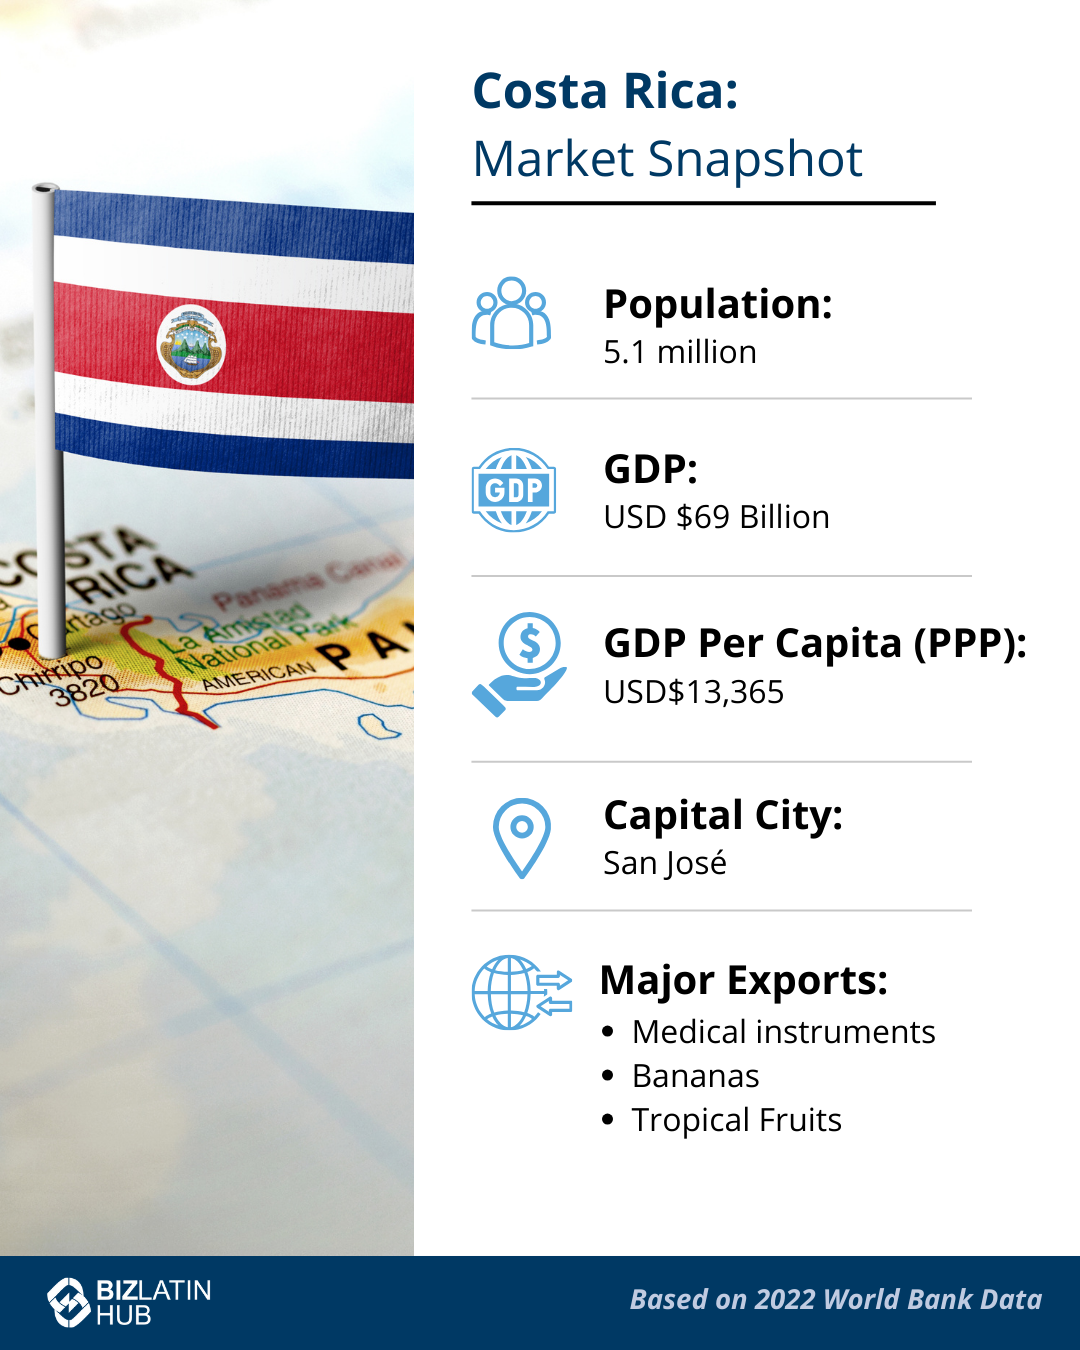 Infographic titled "Costa Rica: Market Snapshot." Displays Costa Rican flag over a map. Lists population as 5.1 million, GDP at USD 69 billion, GDP per capita (PPP) at USD 13,365, capital city as San José, and major exports including medical instruments, bananas, and tropical fruits. Register a branch in Costa Rica for lucrative opportunities.
